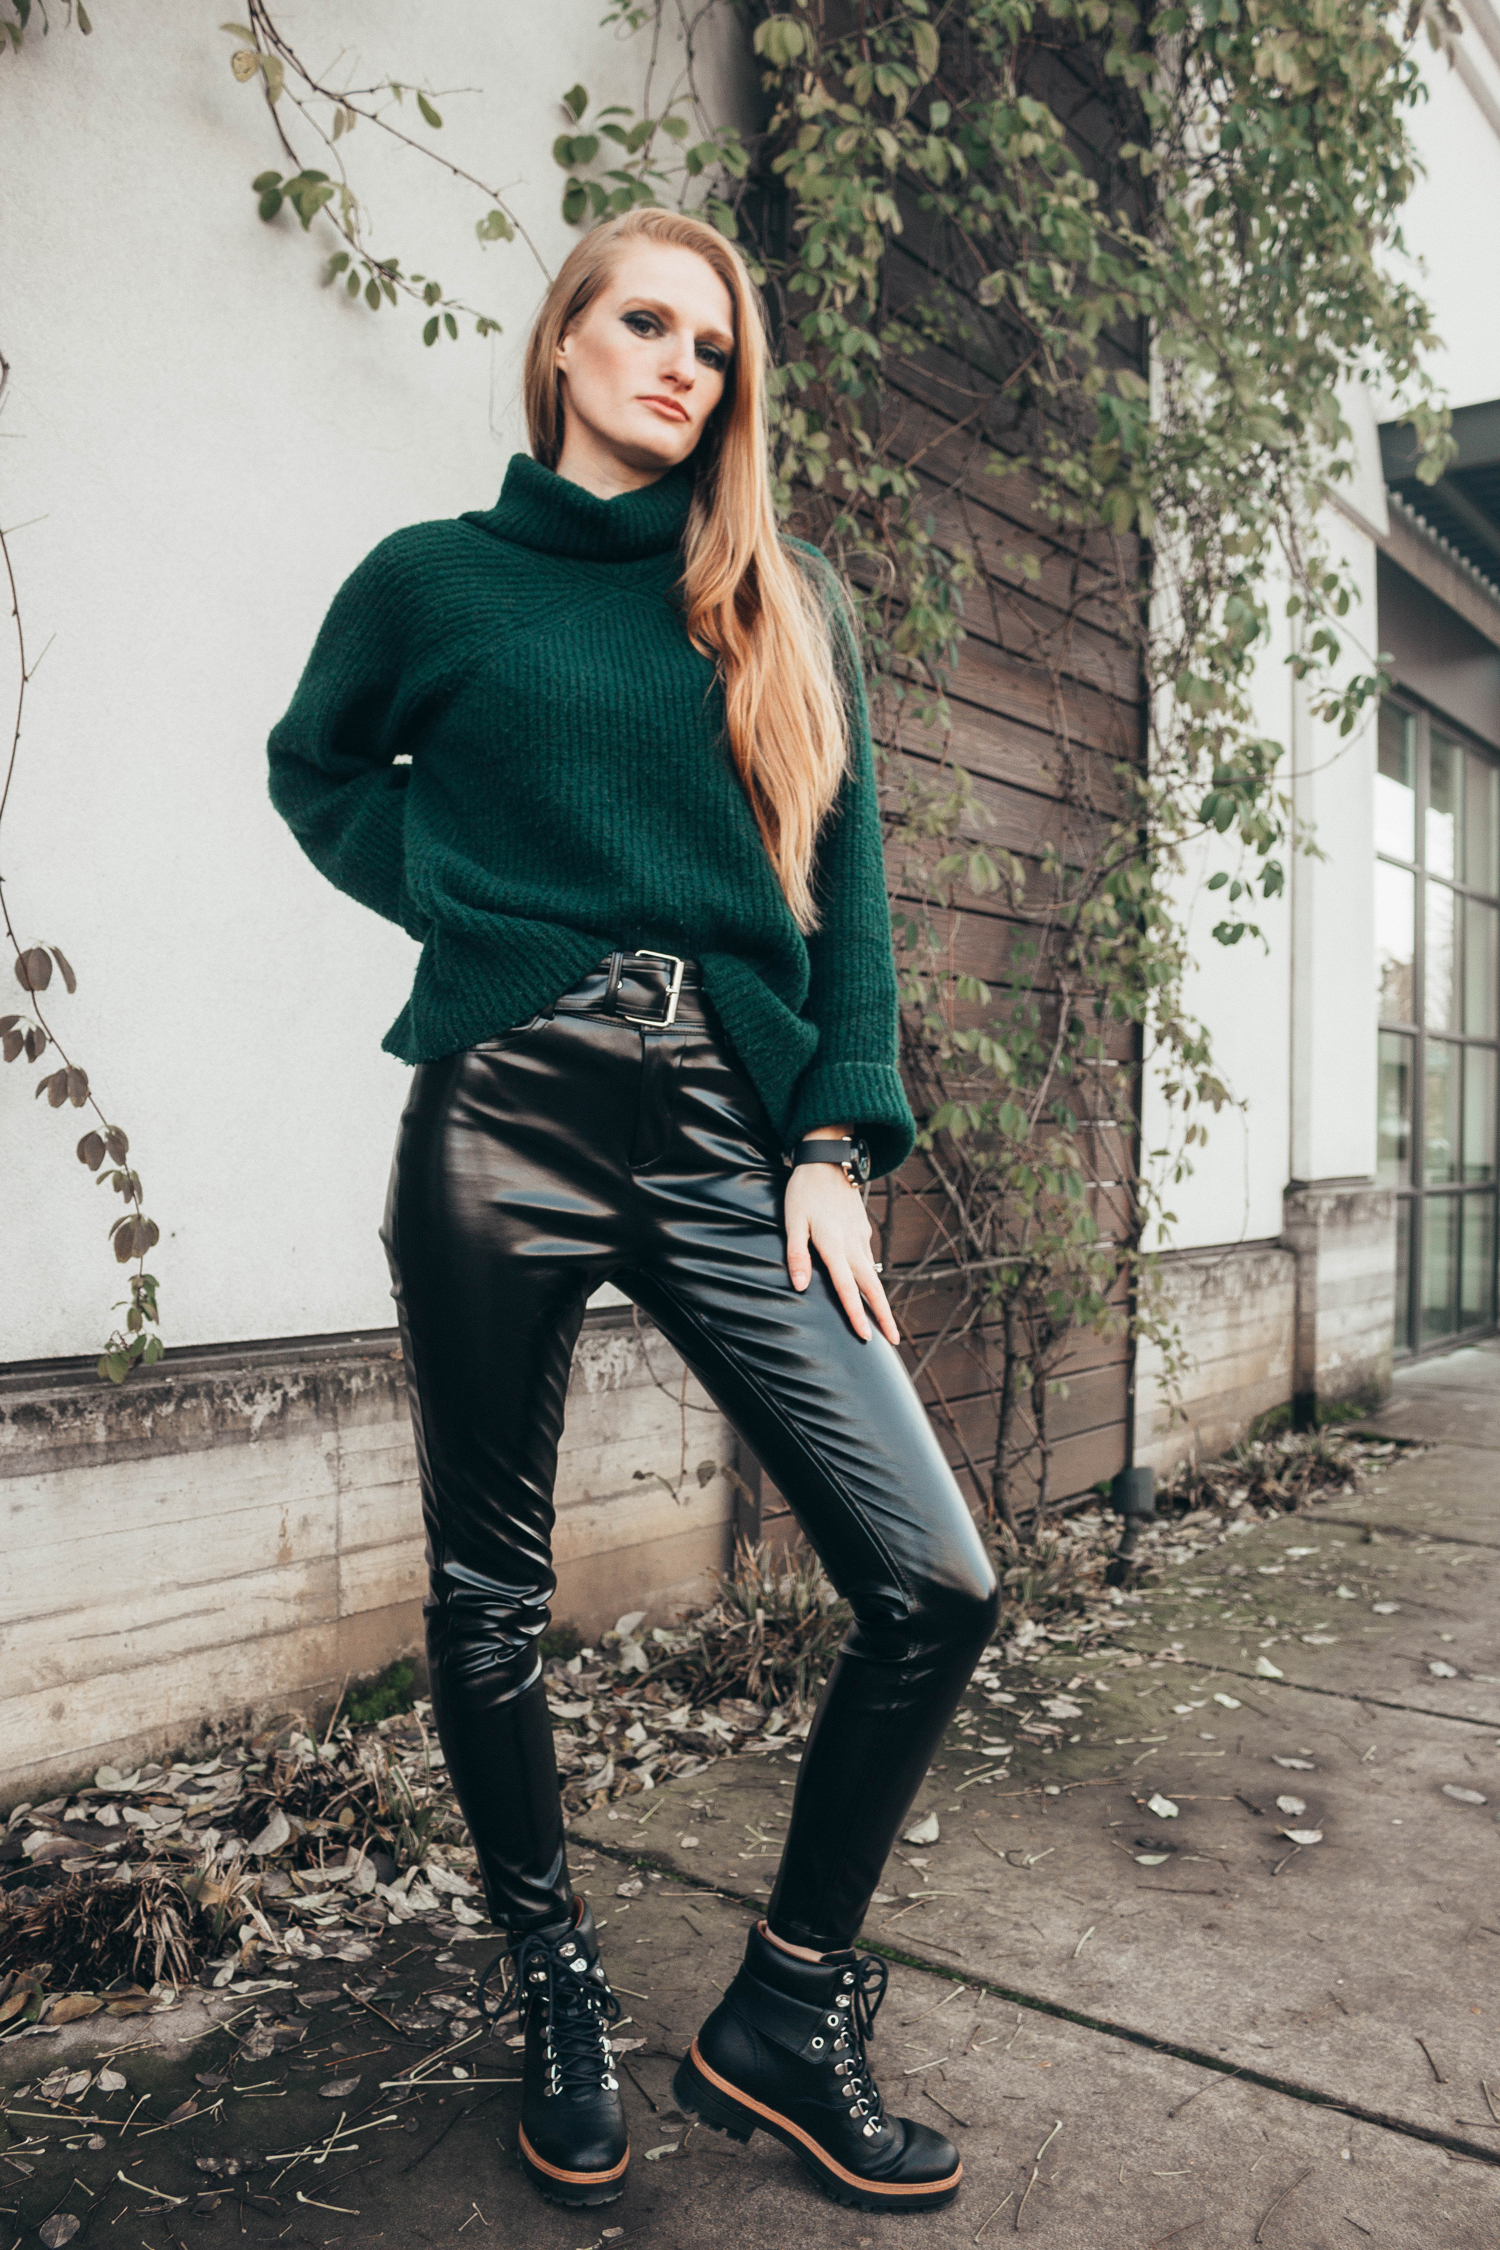 vinyl patent pants green turtle neck sweater xle nakd outfit style black